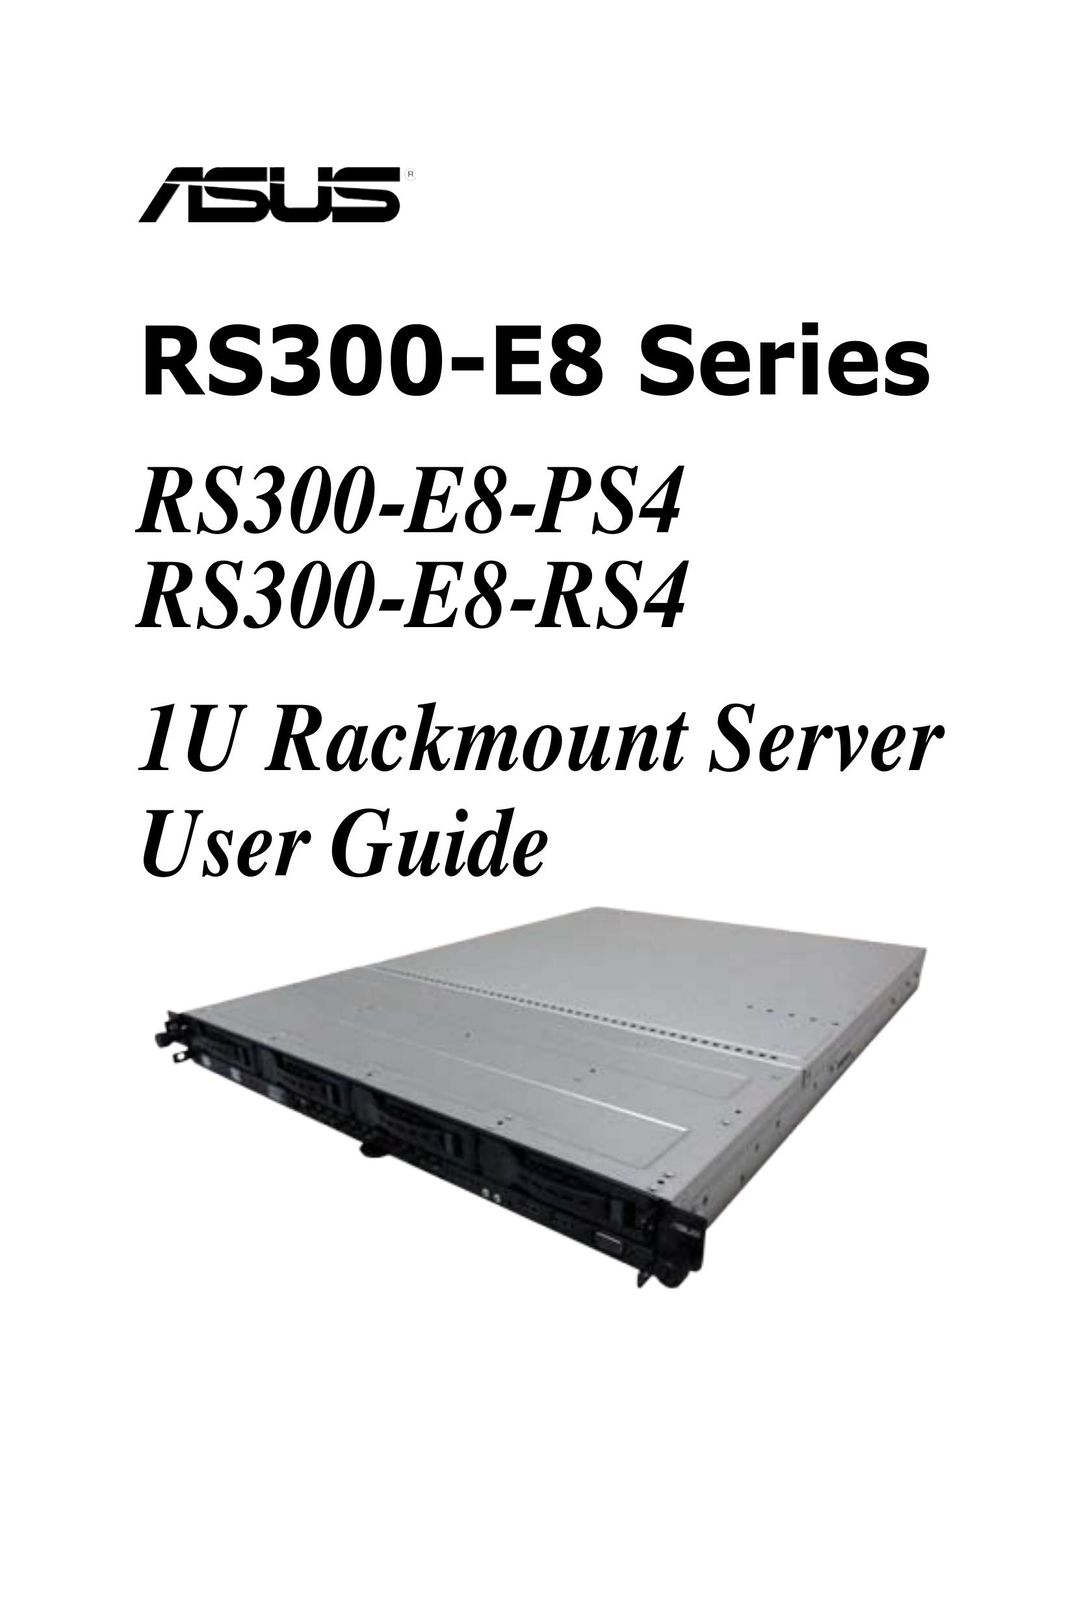 Asus RS300E8PS4 Network Hardware User Manual